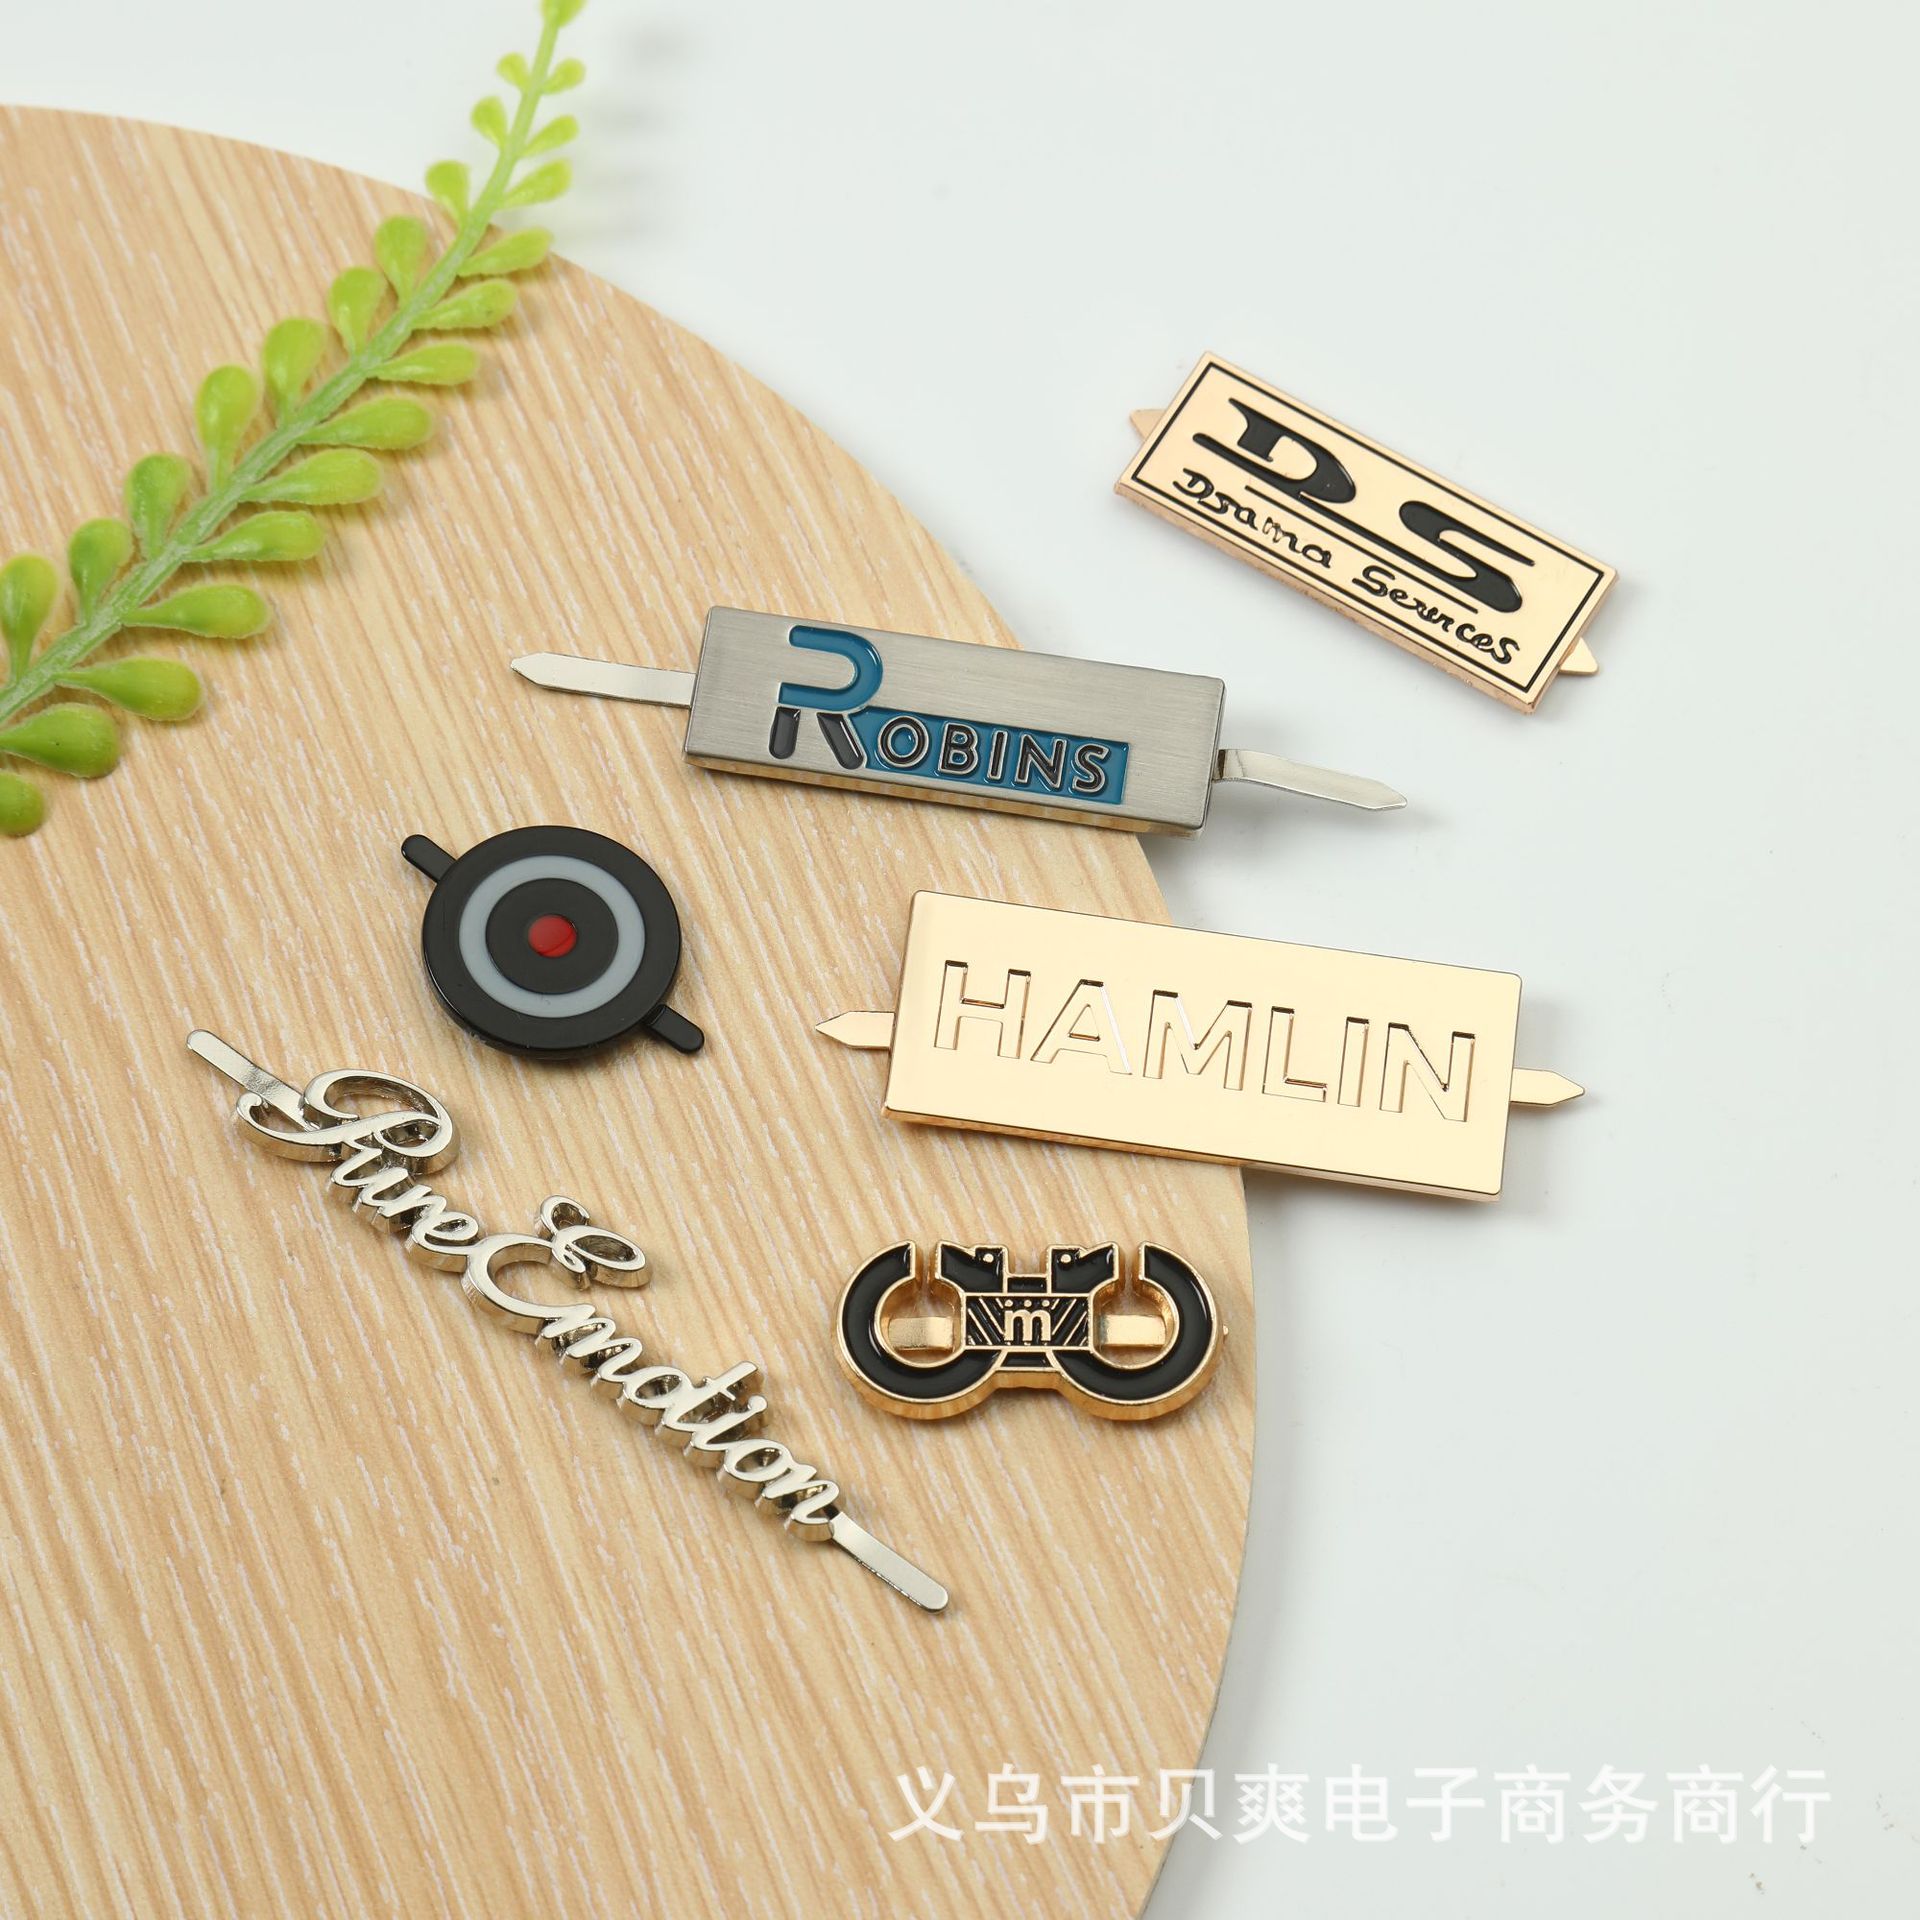 Die-Casting Zinc Alloy Pin Stitching Label Customizable Color Size Shape Hardware Trademark Logo Electroplating Laser